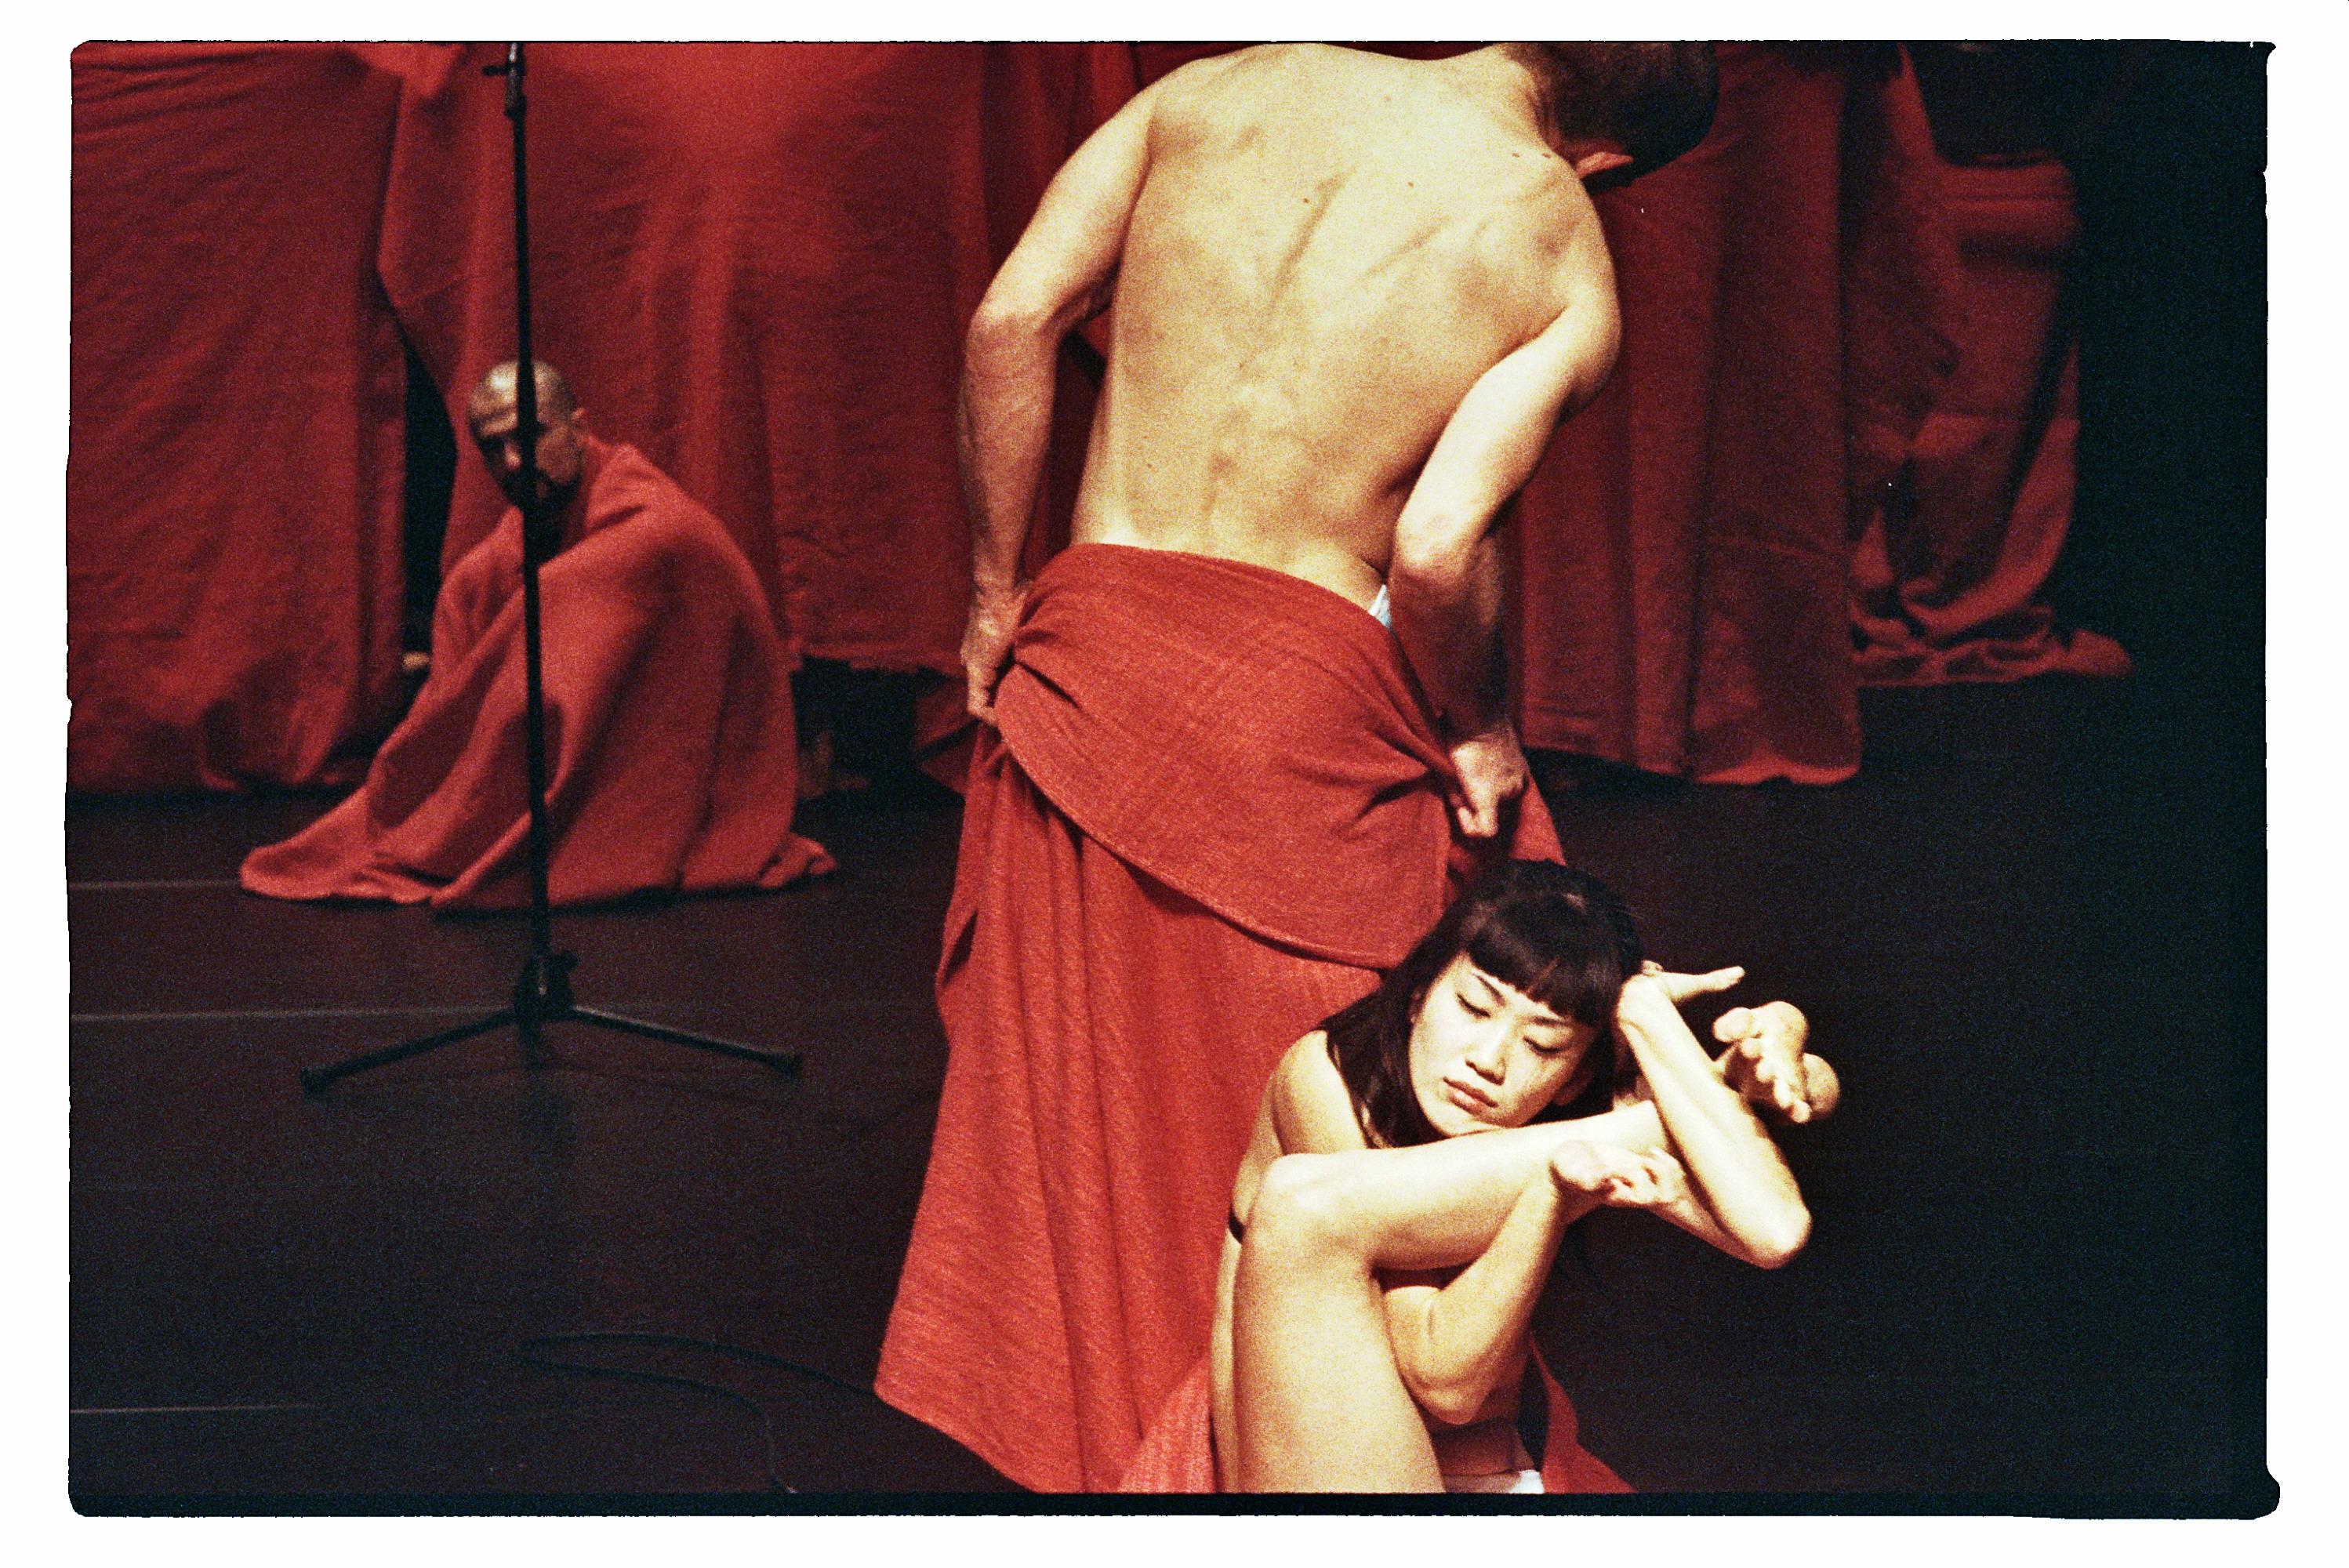 A dancer with a red blanket around his waist and another dancer sitting acrobatically in front of him